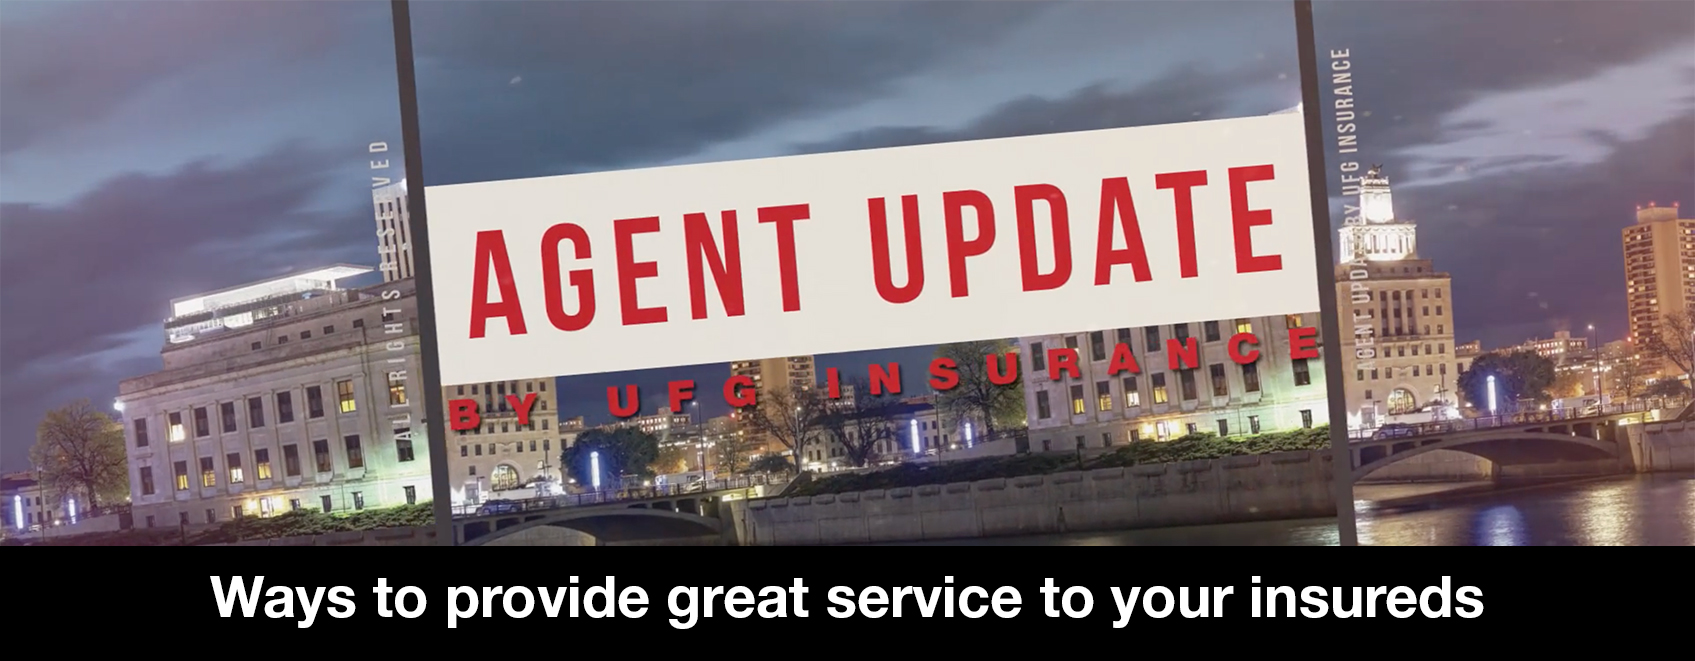 Agent update: Ways to provide great service